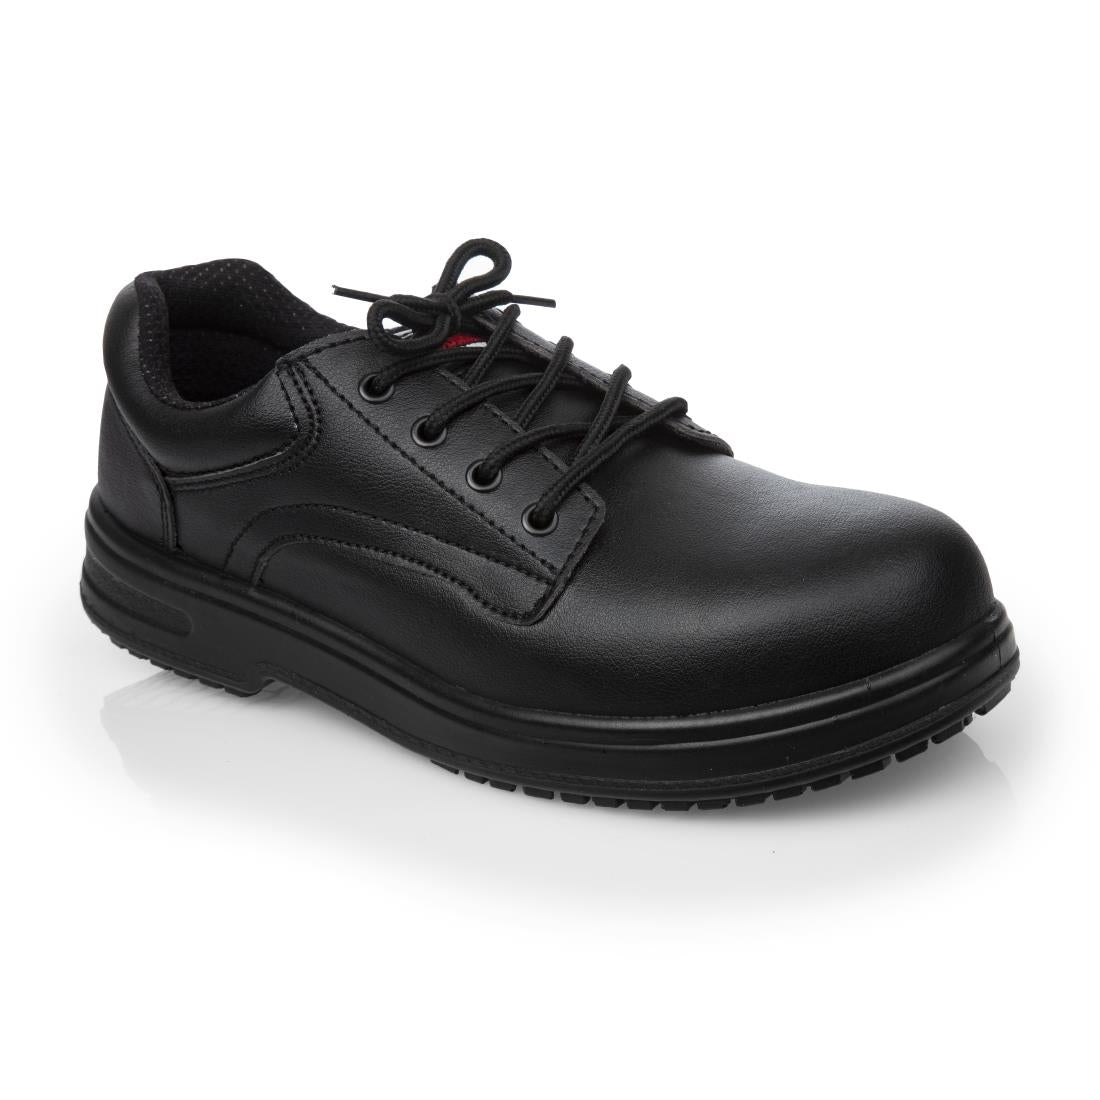 BB497-41 Slipbuster Basic Toe Cap Safety Shoes Black 41 JD Catering Equipment Solutions Ltd